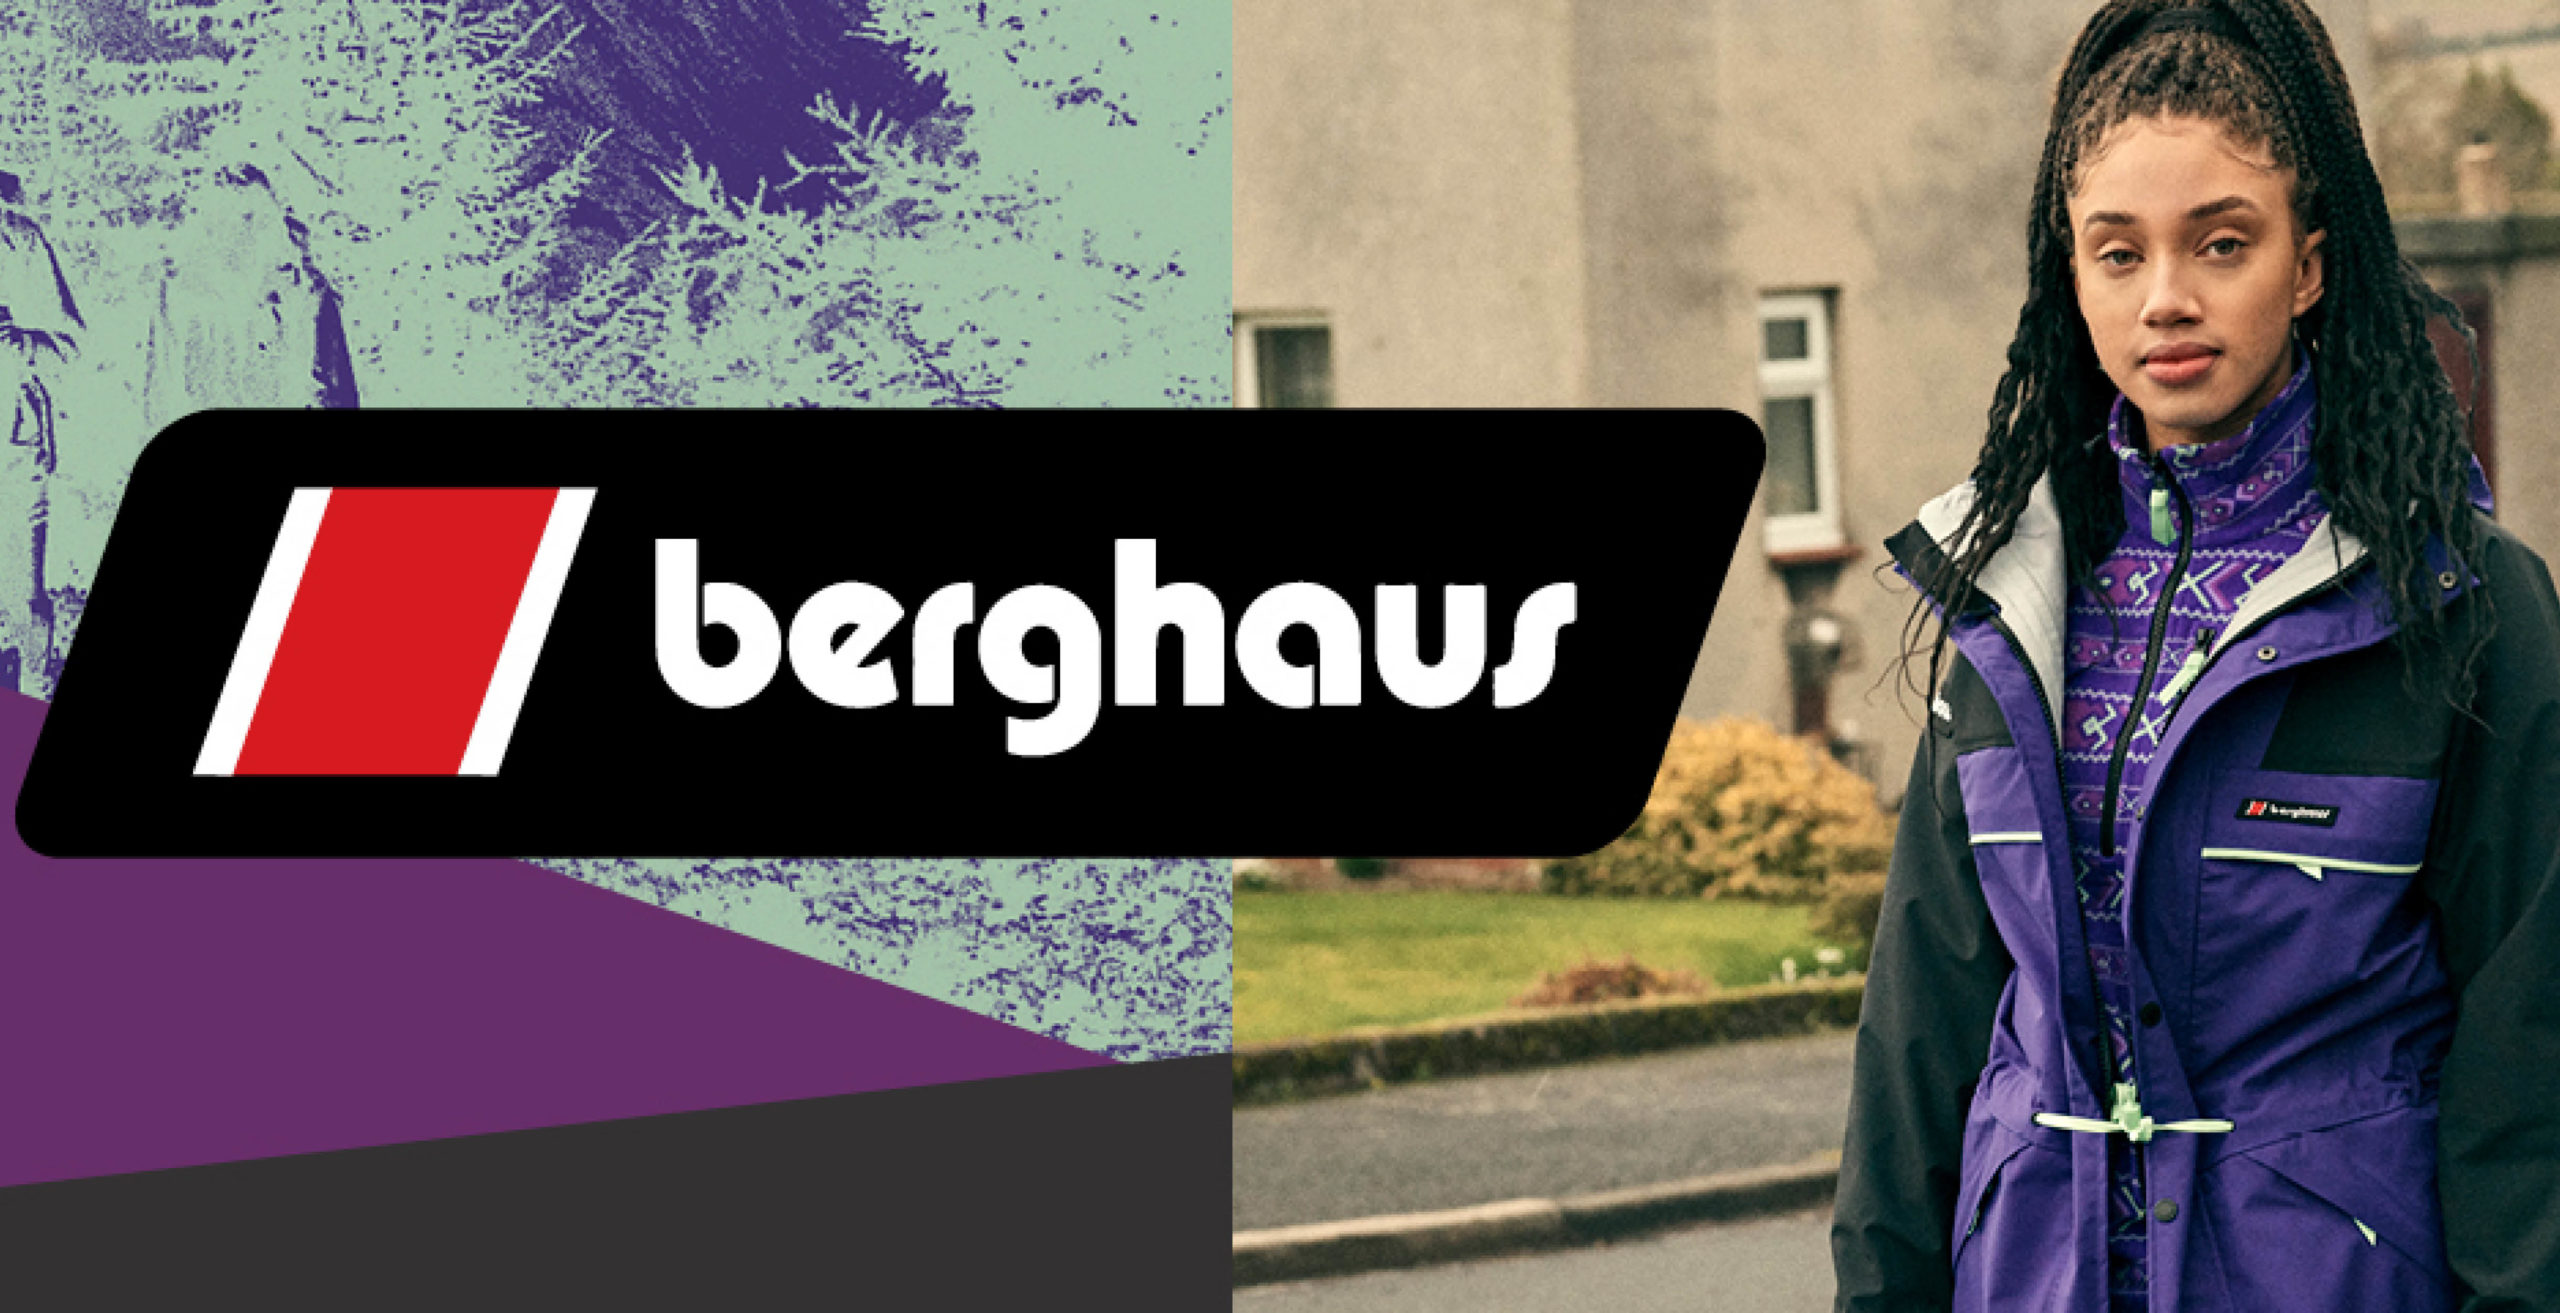 Berghaus launches exclusive second offering from ‘Dean Street’ collection